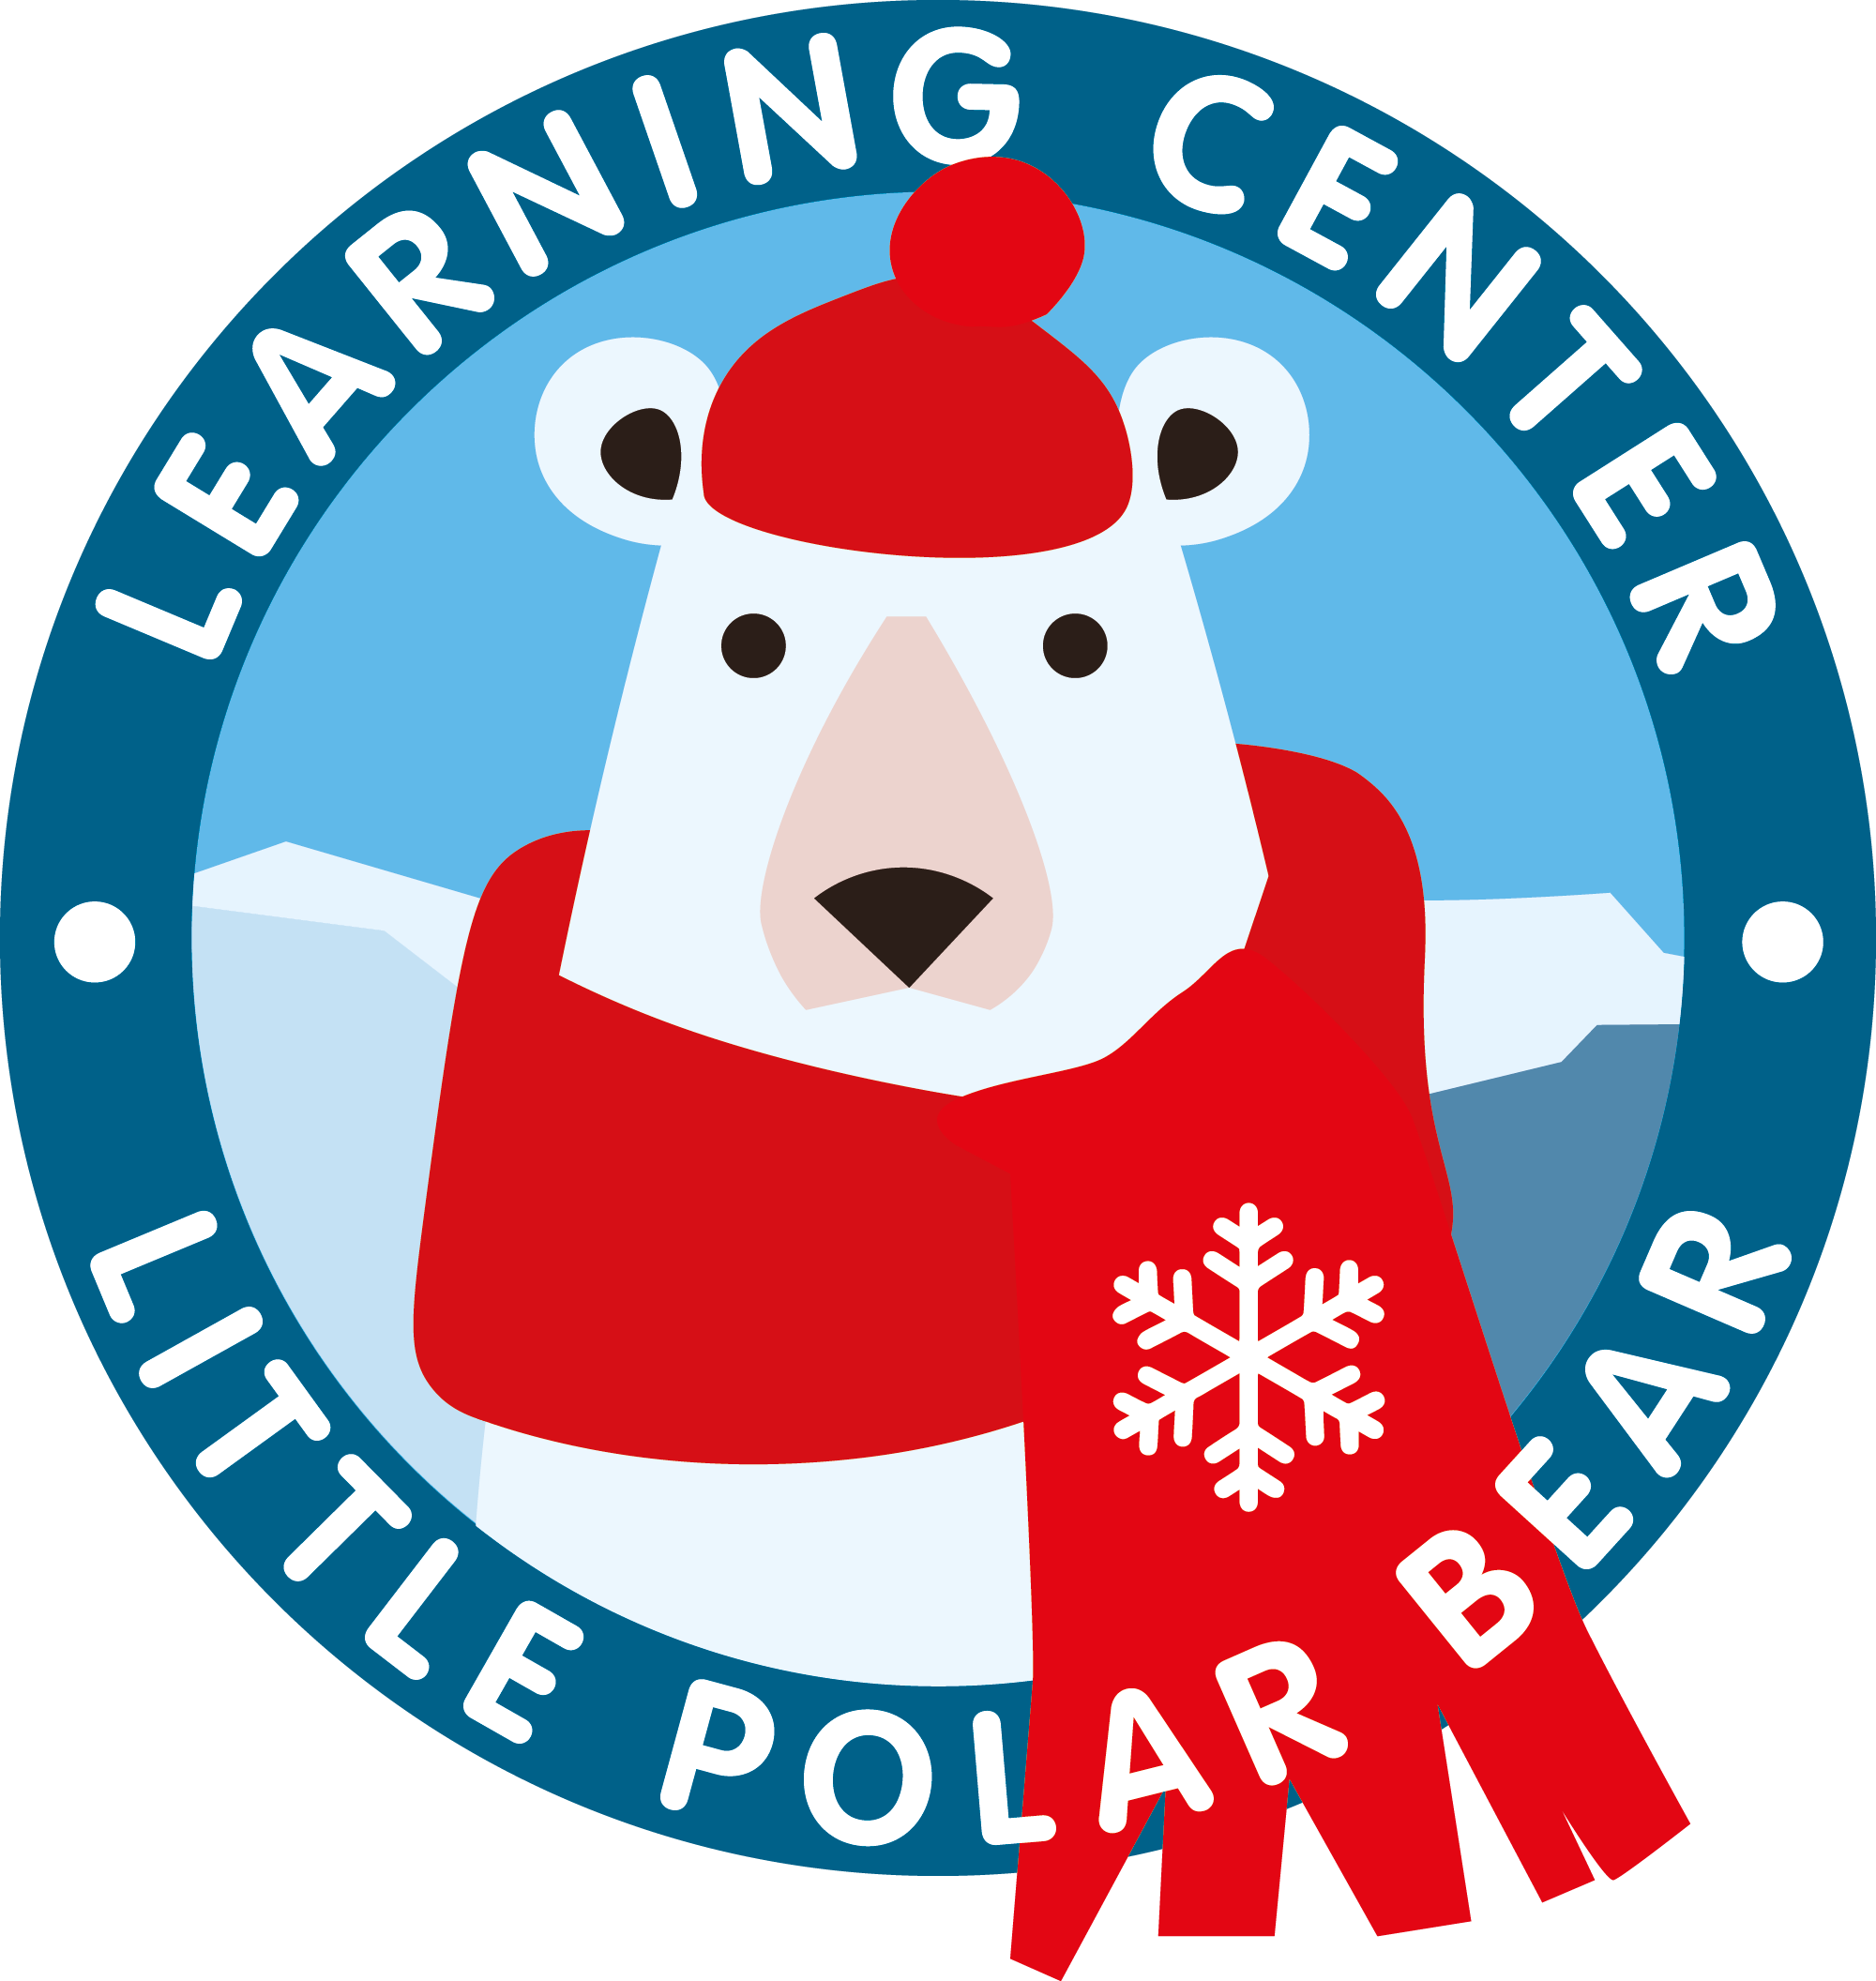 Polar Bear Environmental Learning Center (City of Norilsk) was 
inaugurated as part of the Let Us Safeguard the Polar Bear project implemented at the Taymyr Peninsula, Krasnoyarsk Region.